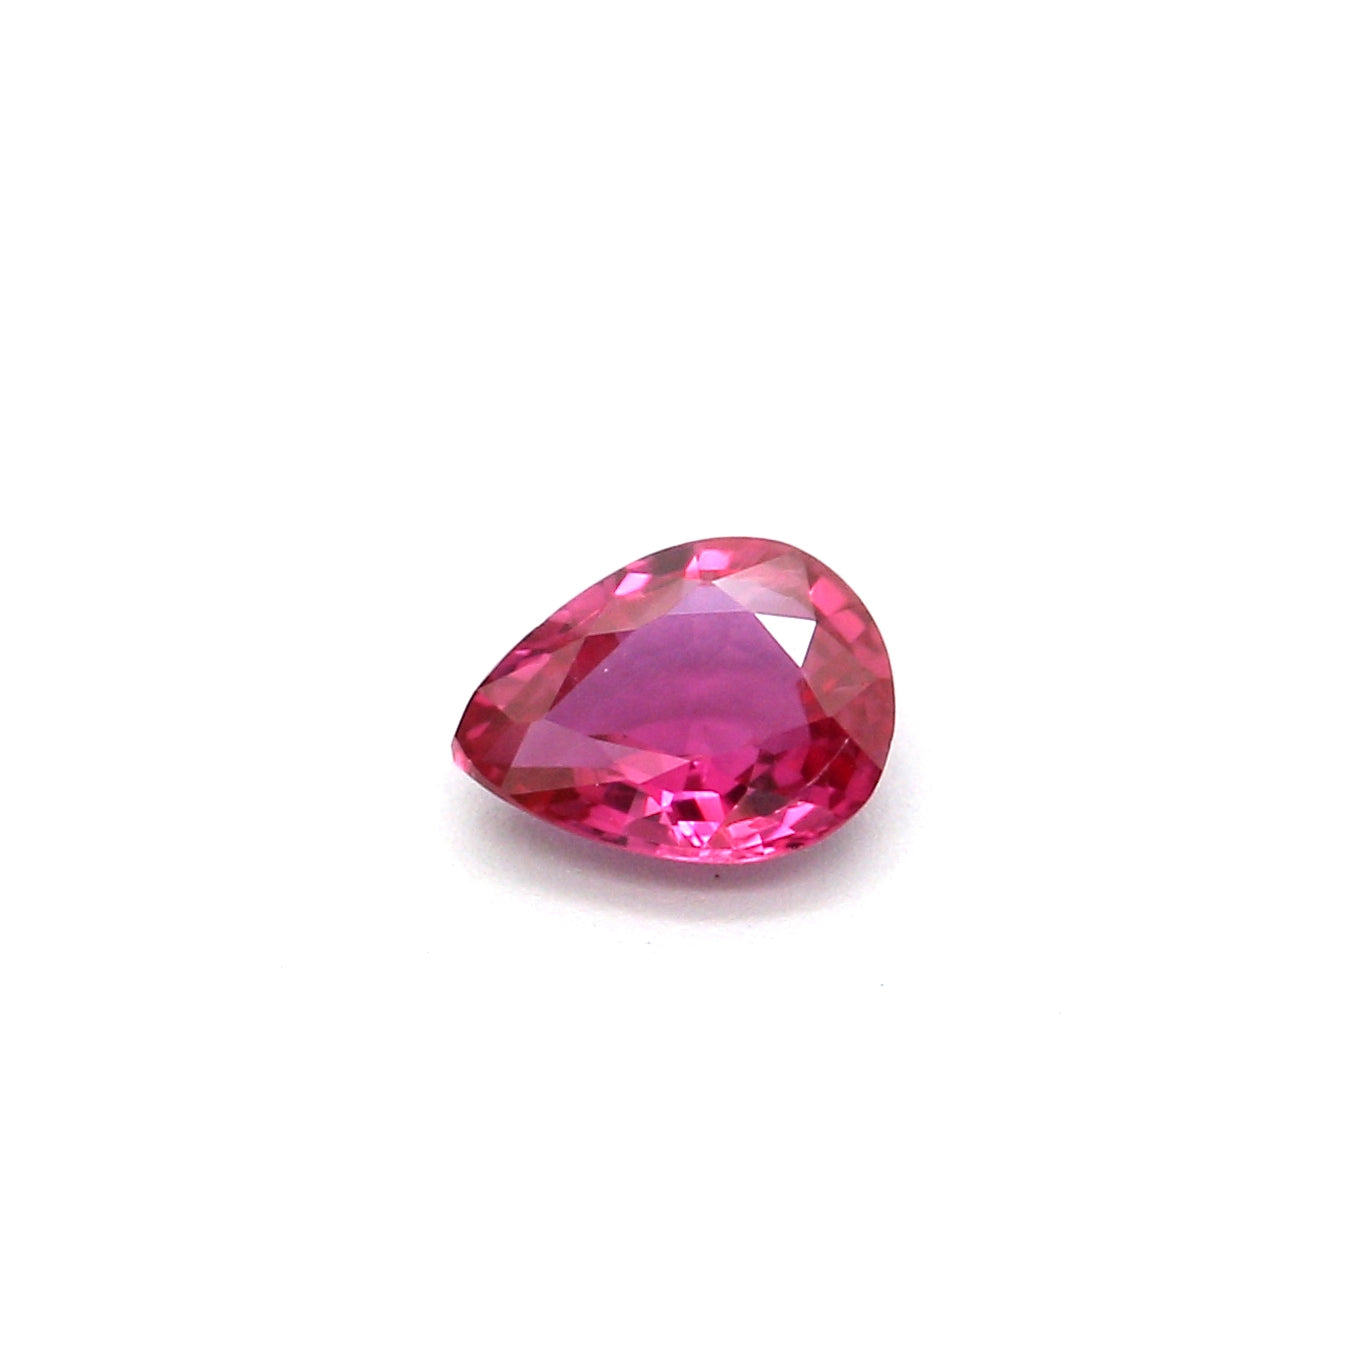 0.28ct Pinkish Red, Pear Shape Ruby, Heated, Thailand - 4.89 x 3.80 x 1.85mm